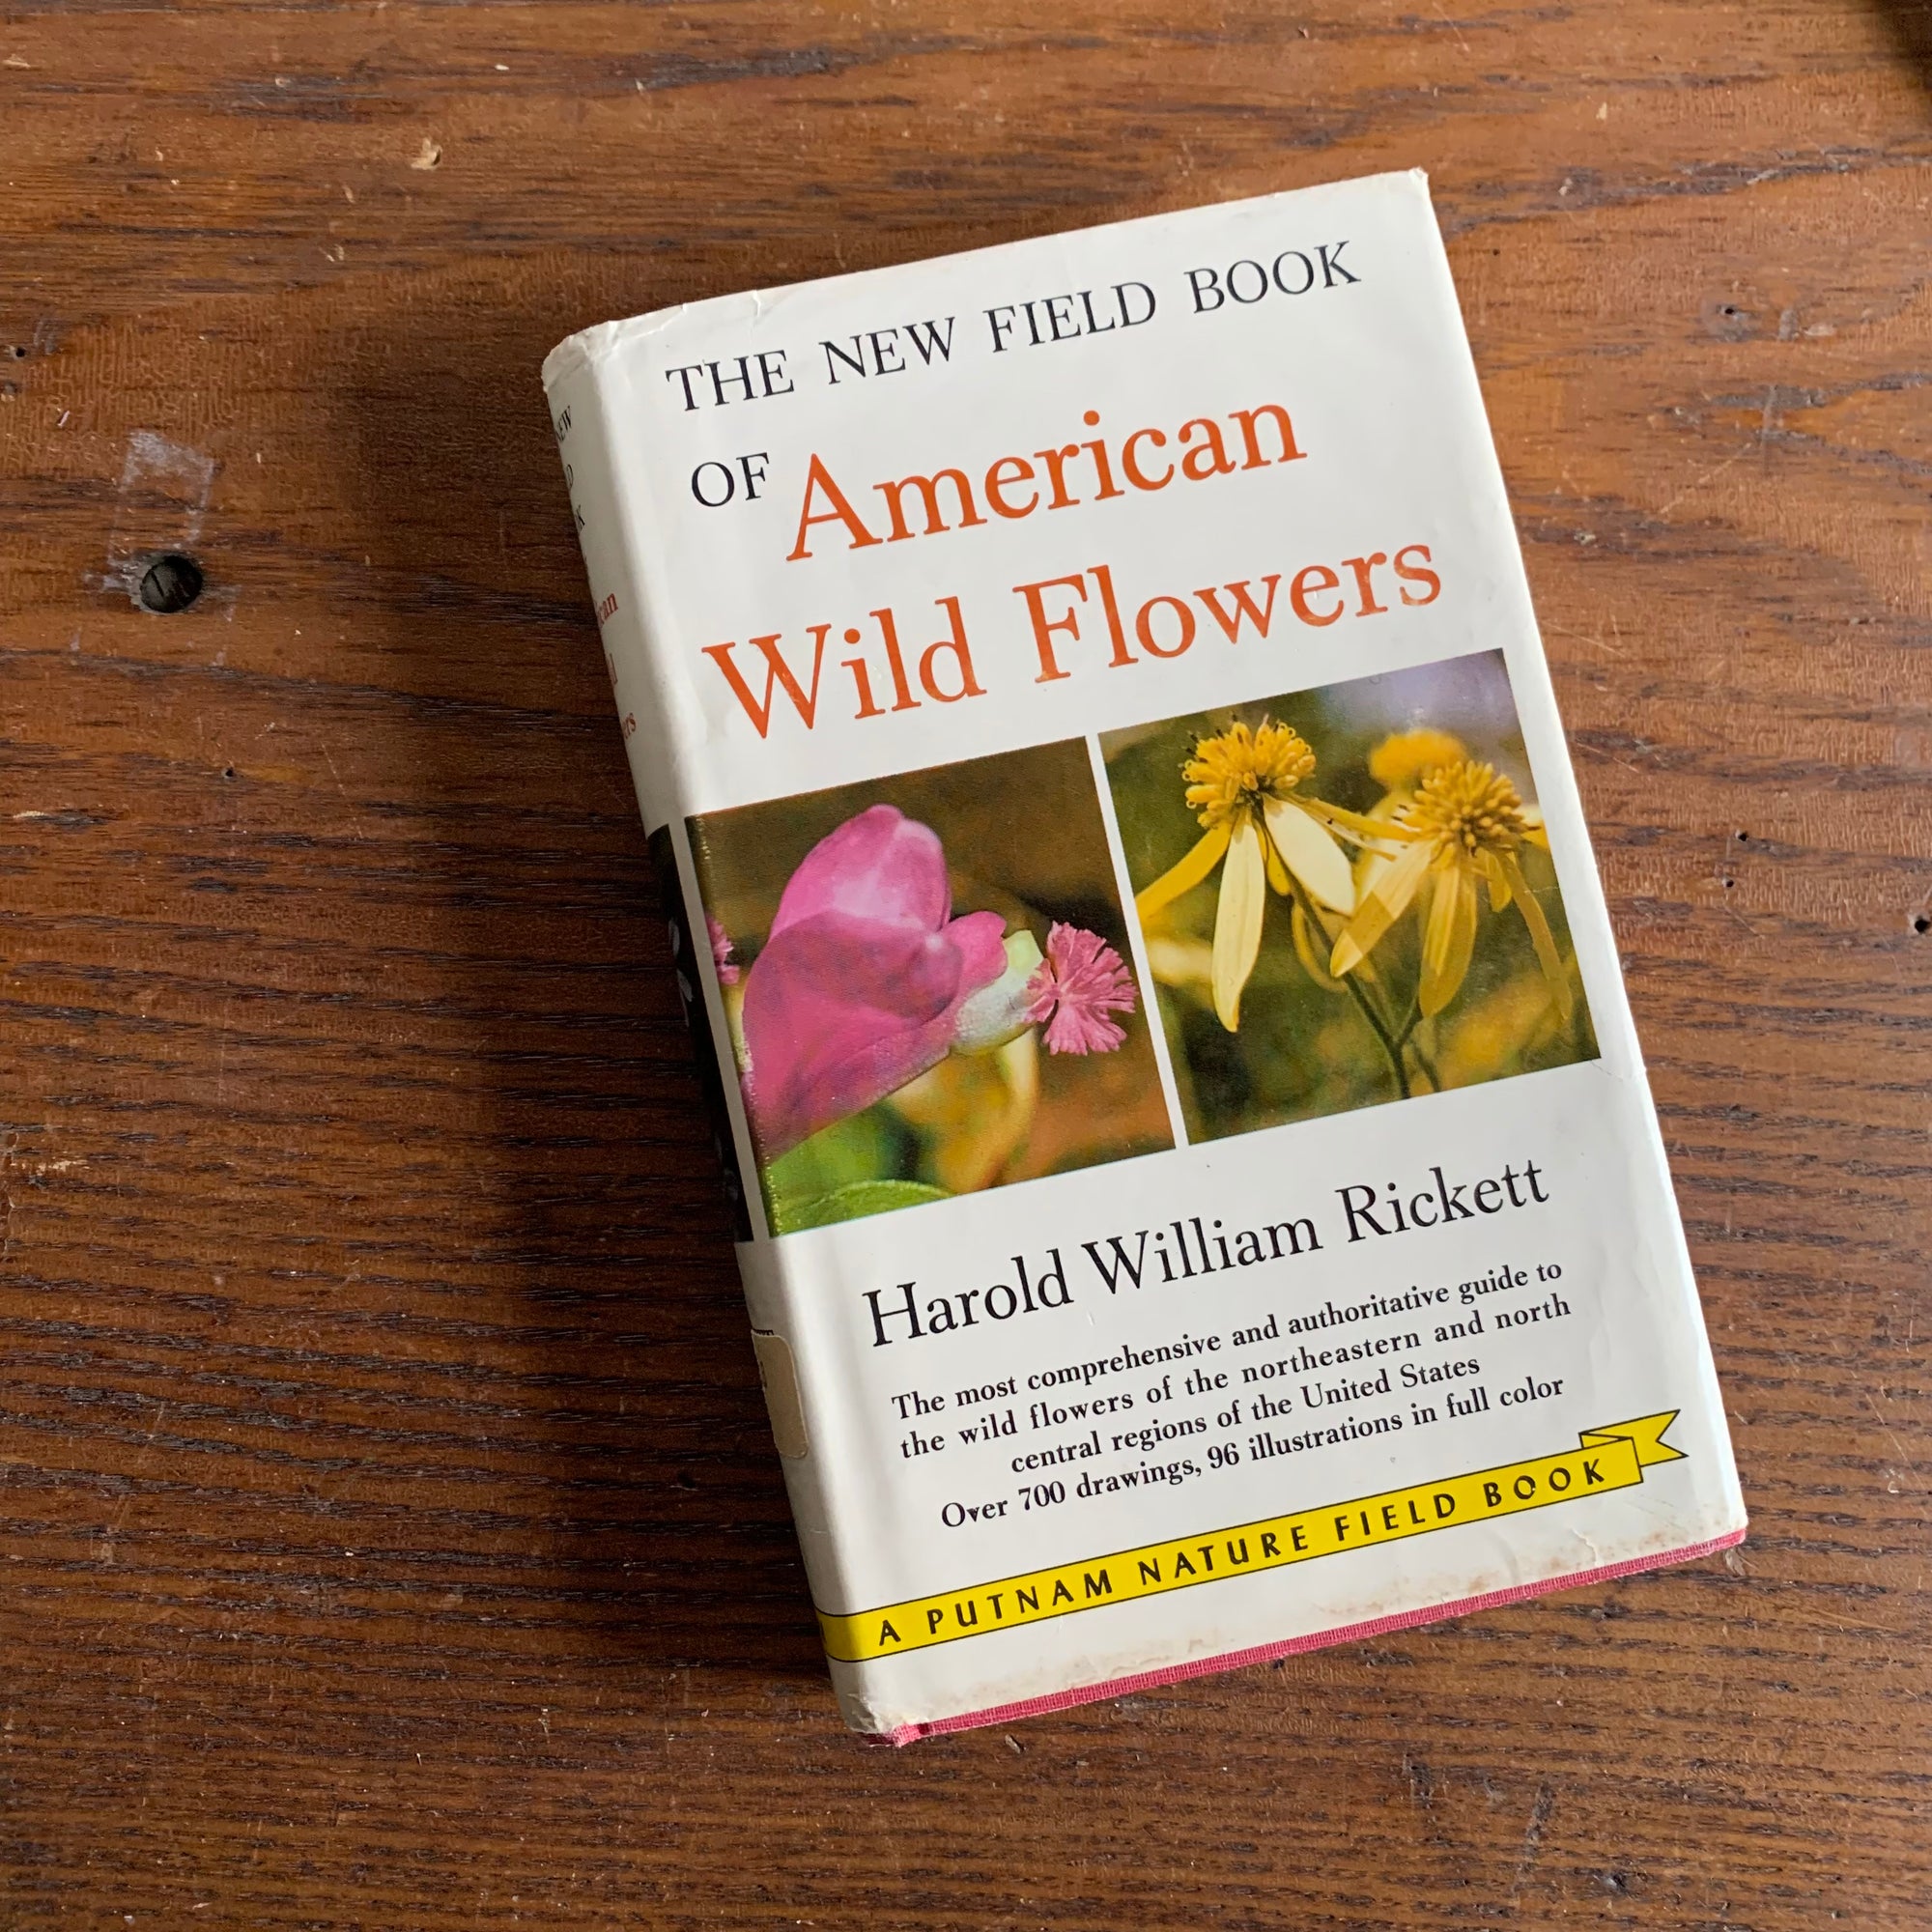 The New Field Book of American Wild Flowers by Harold William Rickett - A Putnam Nature Field Guide - Dust Jacket Cover